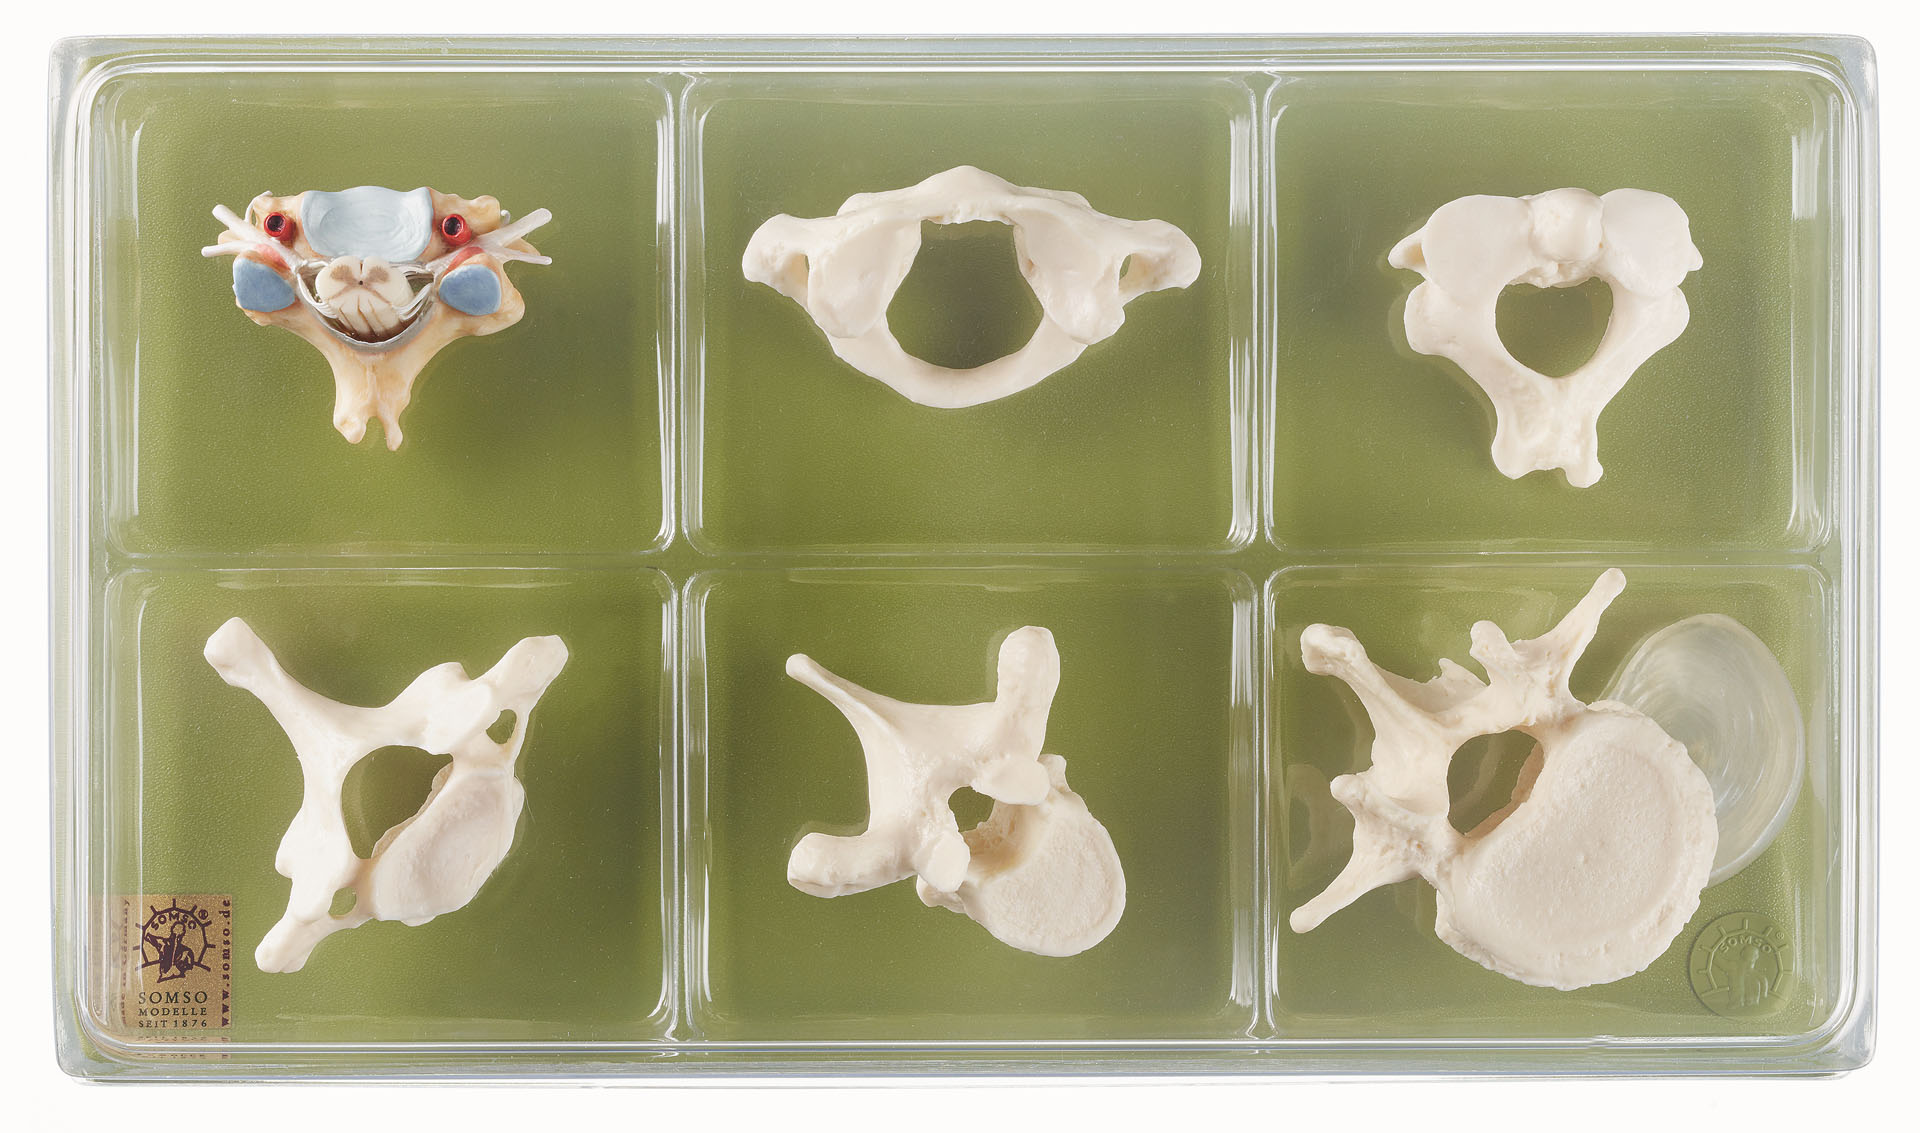 Collection Case “Vertebrae and Spinal Cord”